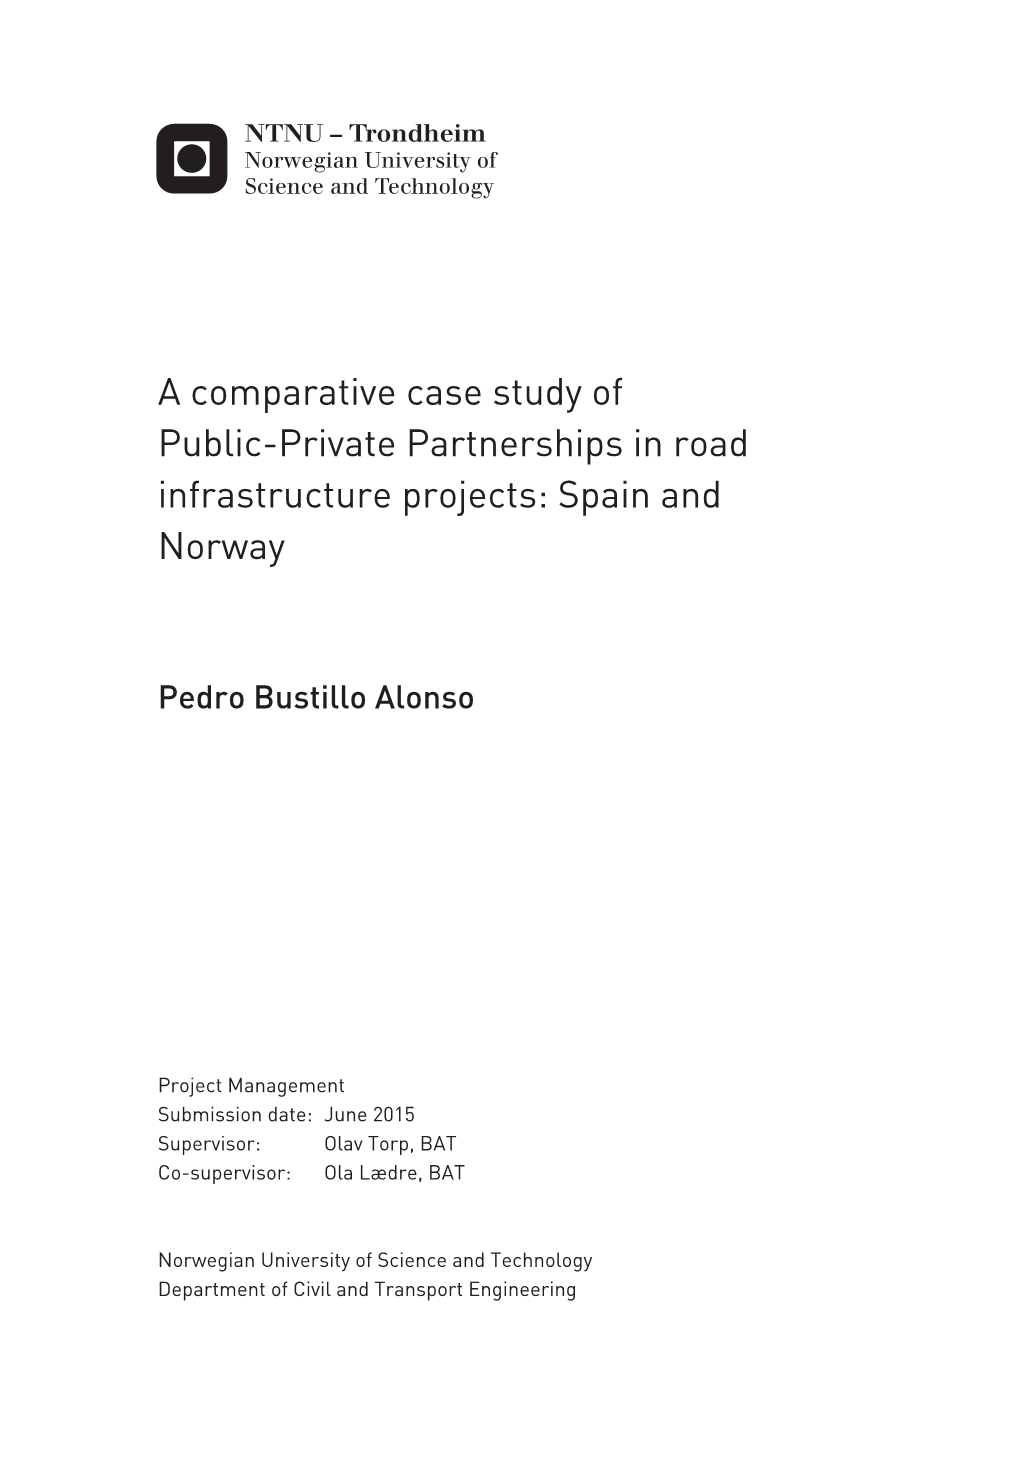 A Comparative Case Study of Public-Private Partnerships in Road Infrastructure Projects: Spain and Norway